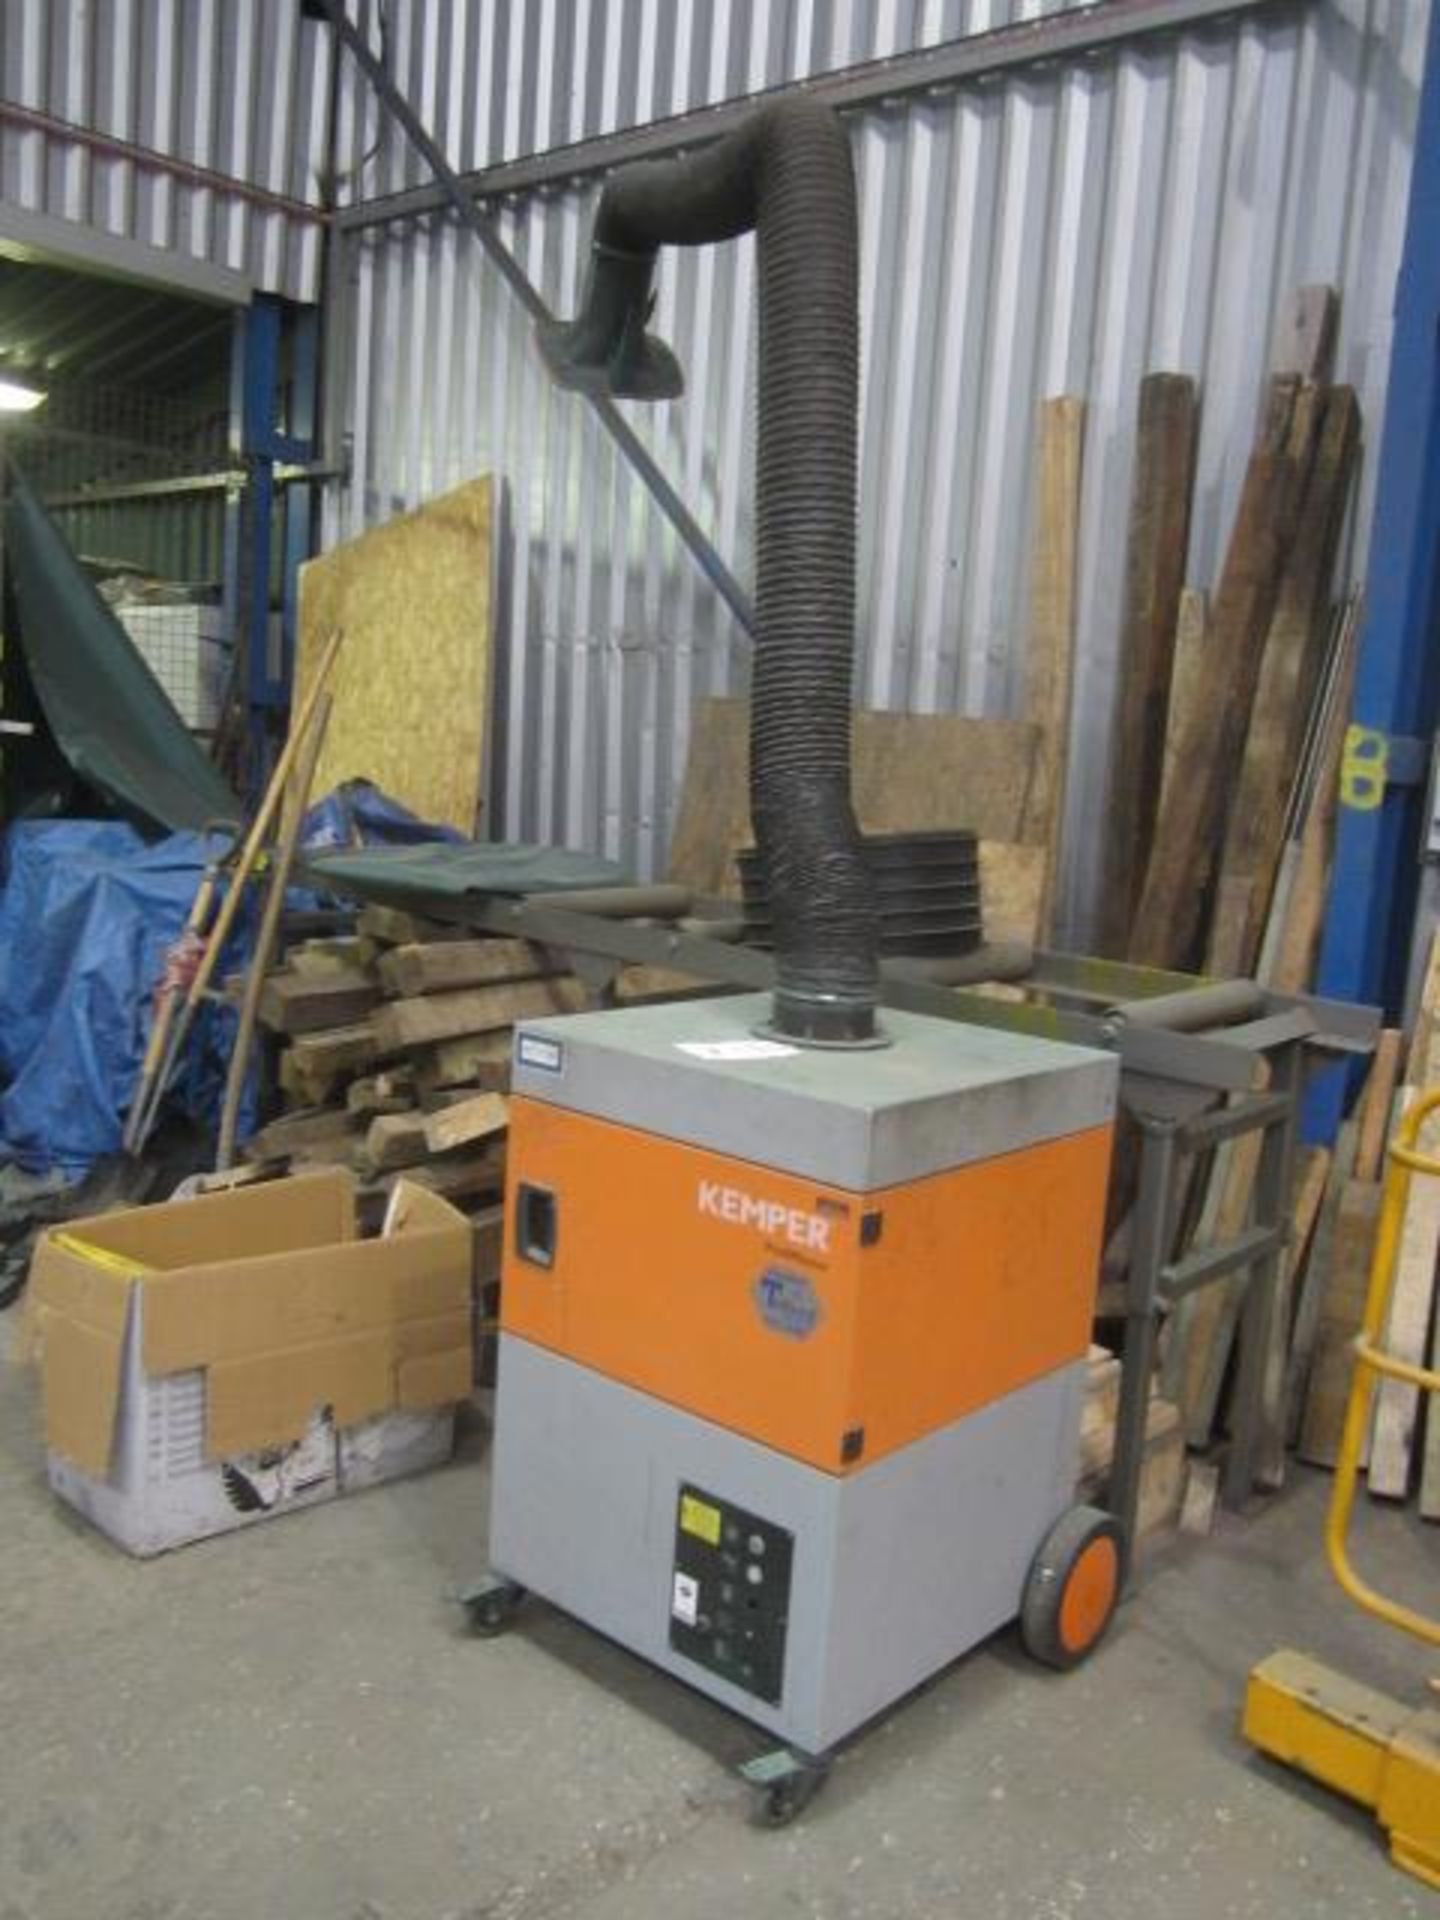 Kemper Profimaster mobile dust extraction - Image 4 of 5